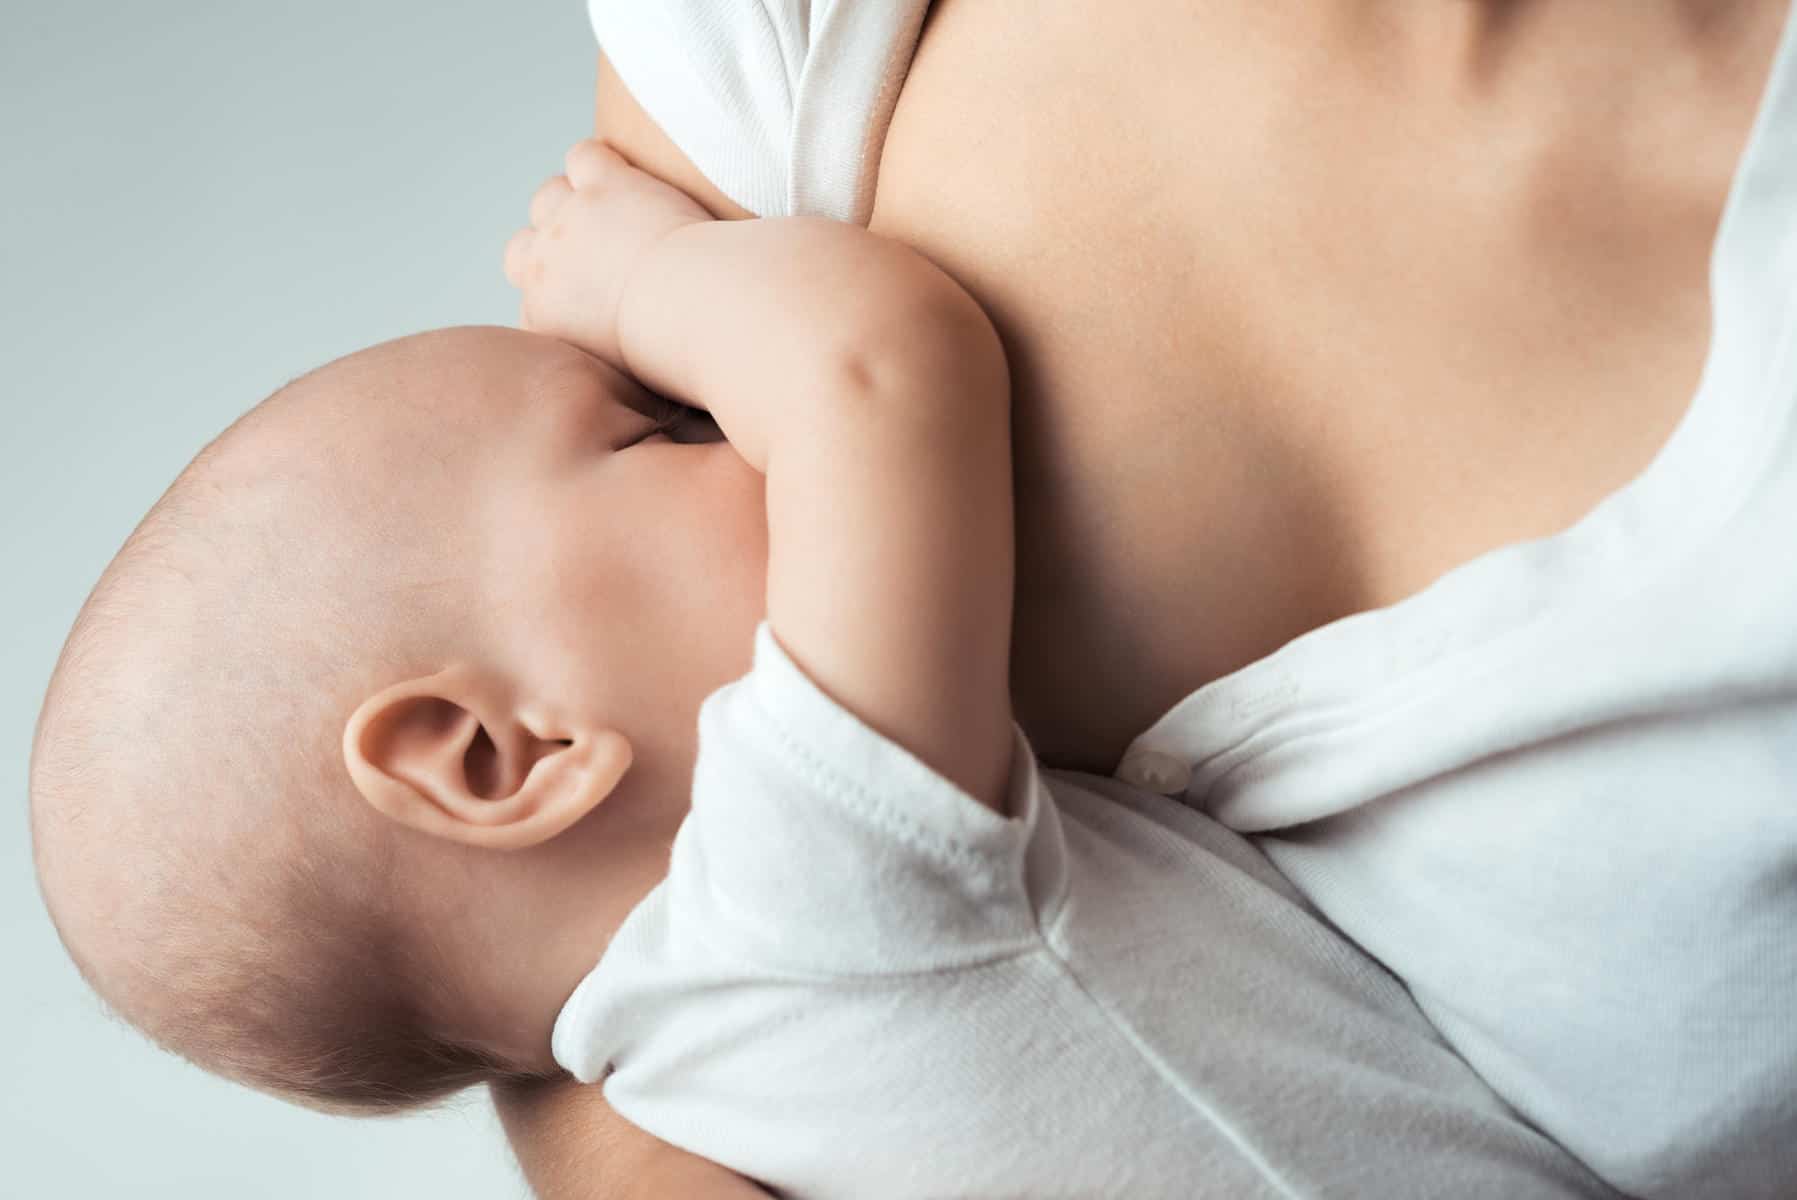 Breastfeeding experience – things you need to know